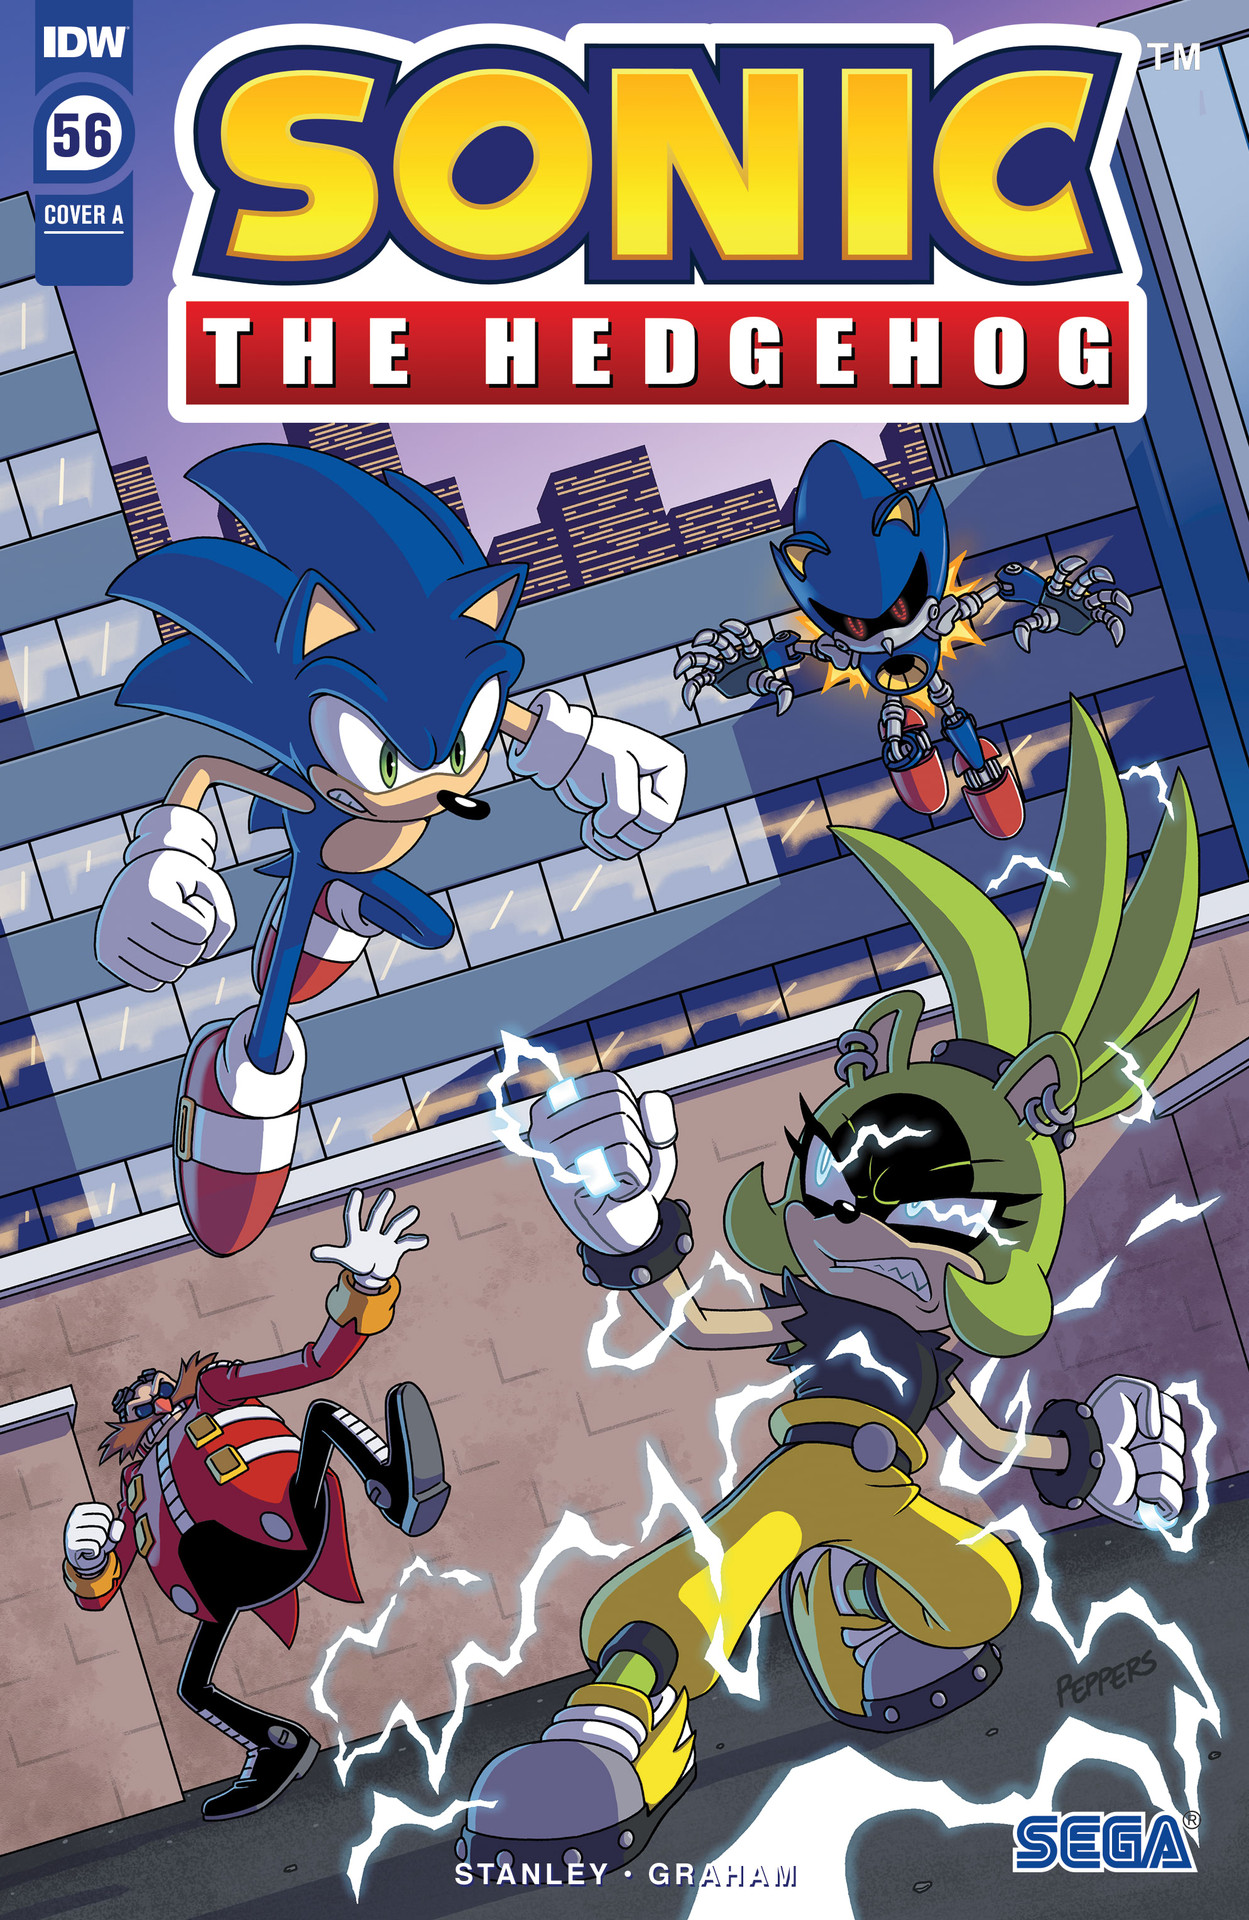 Sonic idw issue 56 read online